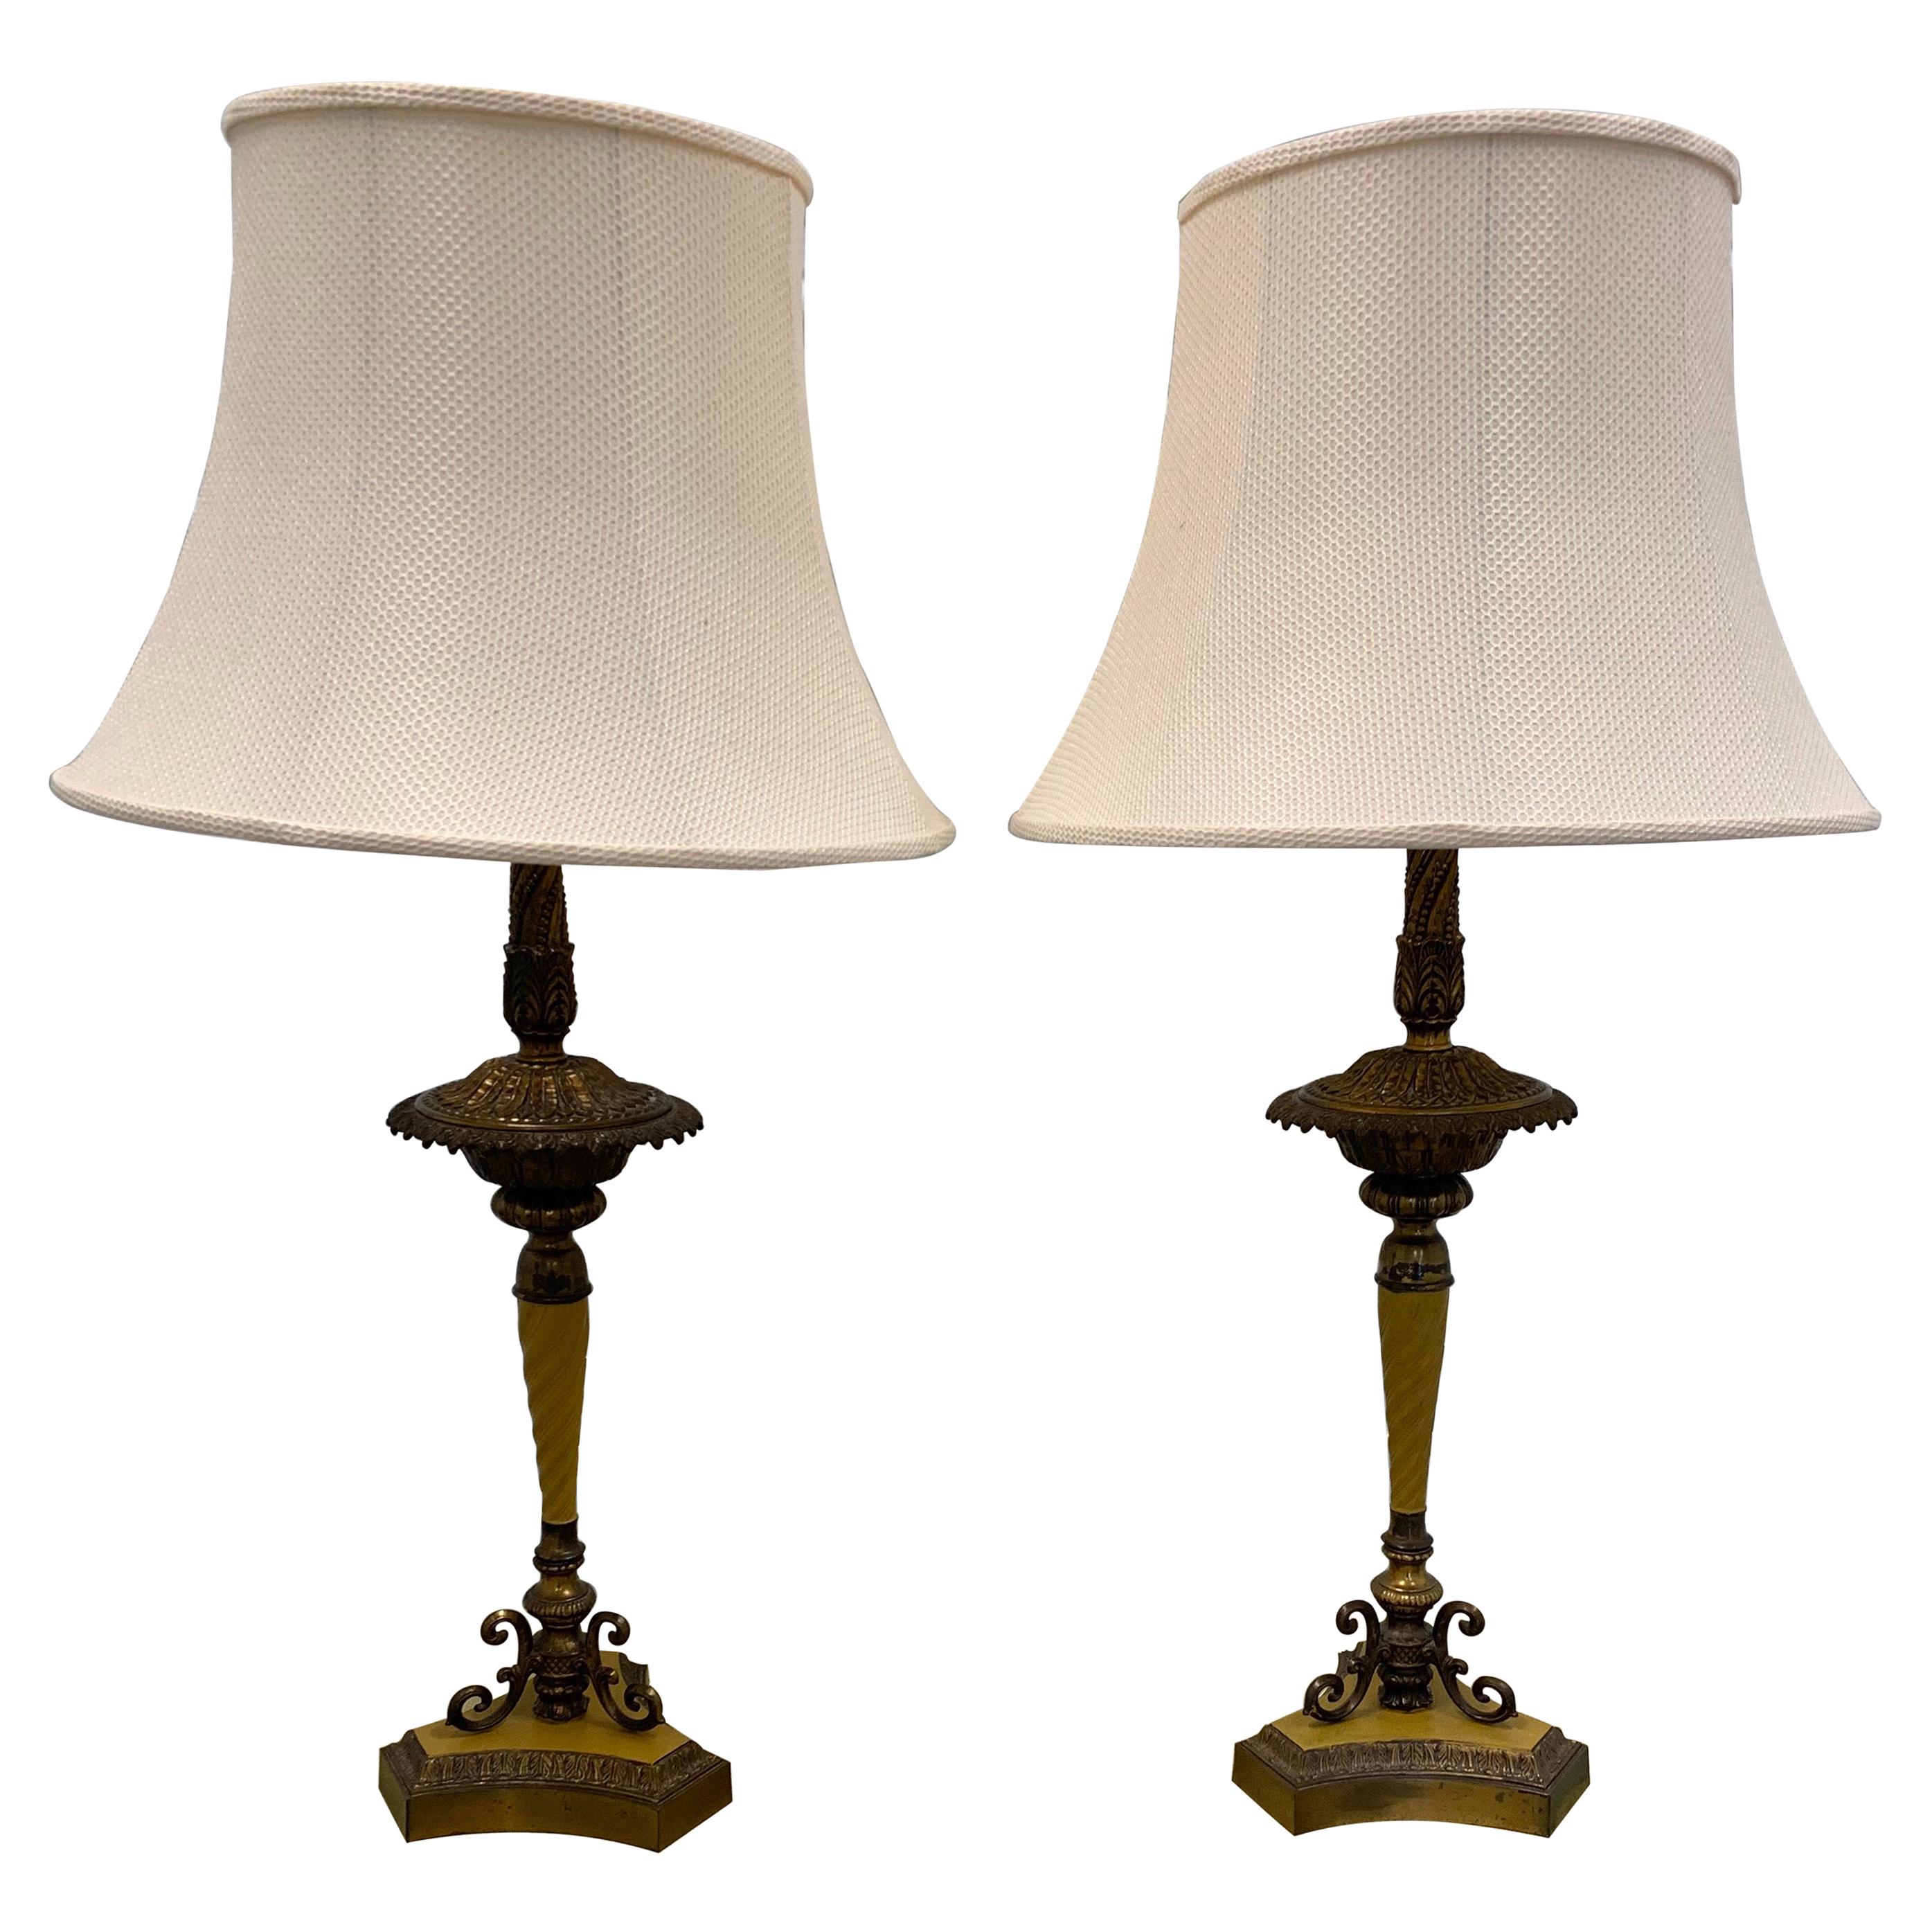 Neoclassical Style Pair of Vintage Tall Table Lamps with Brass and Metal